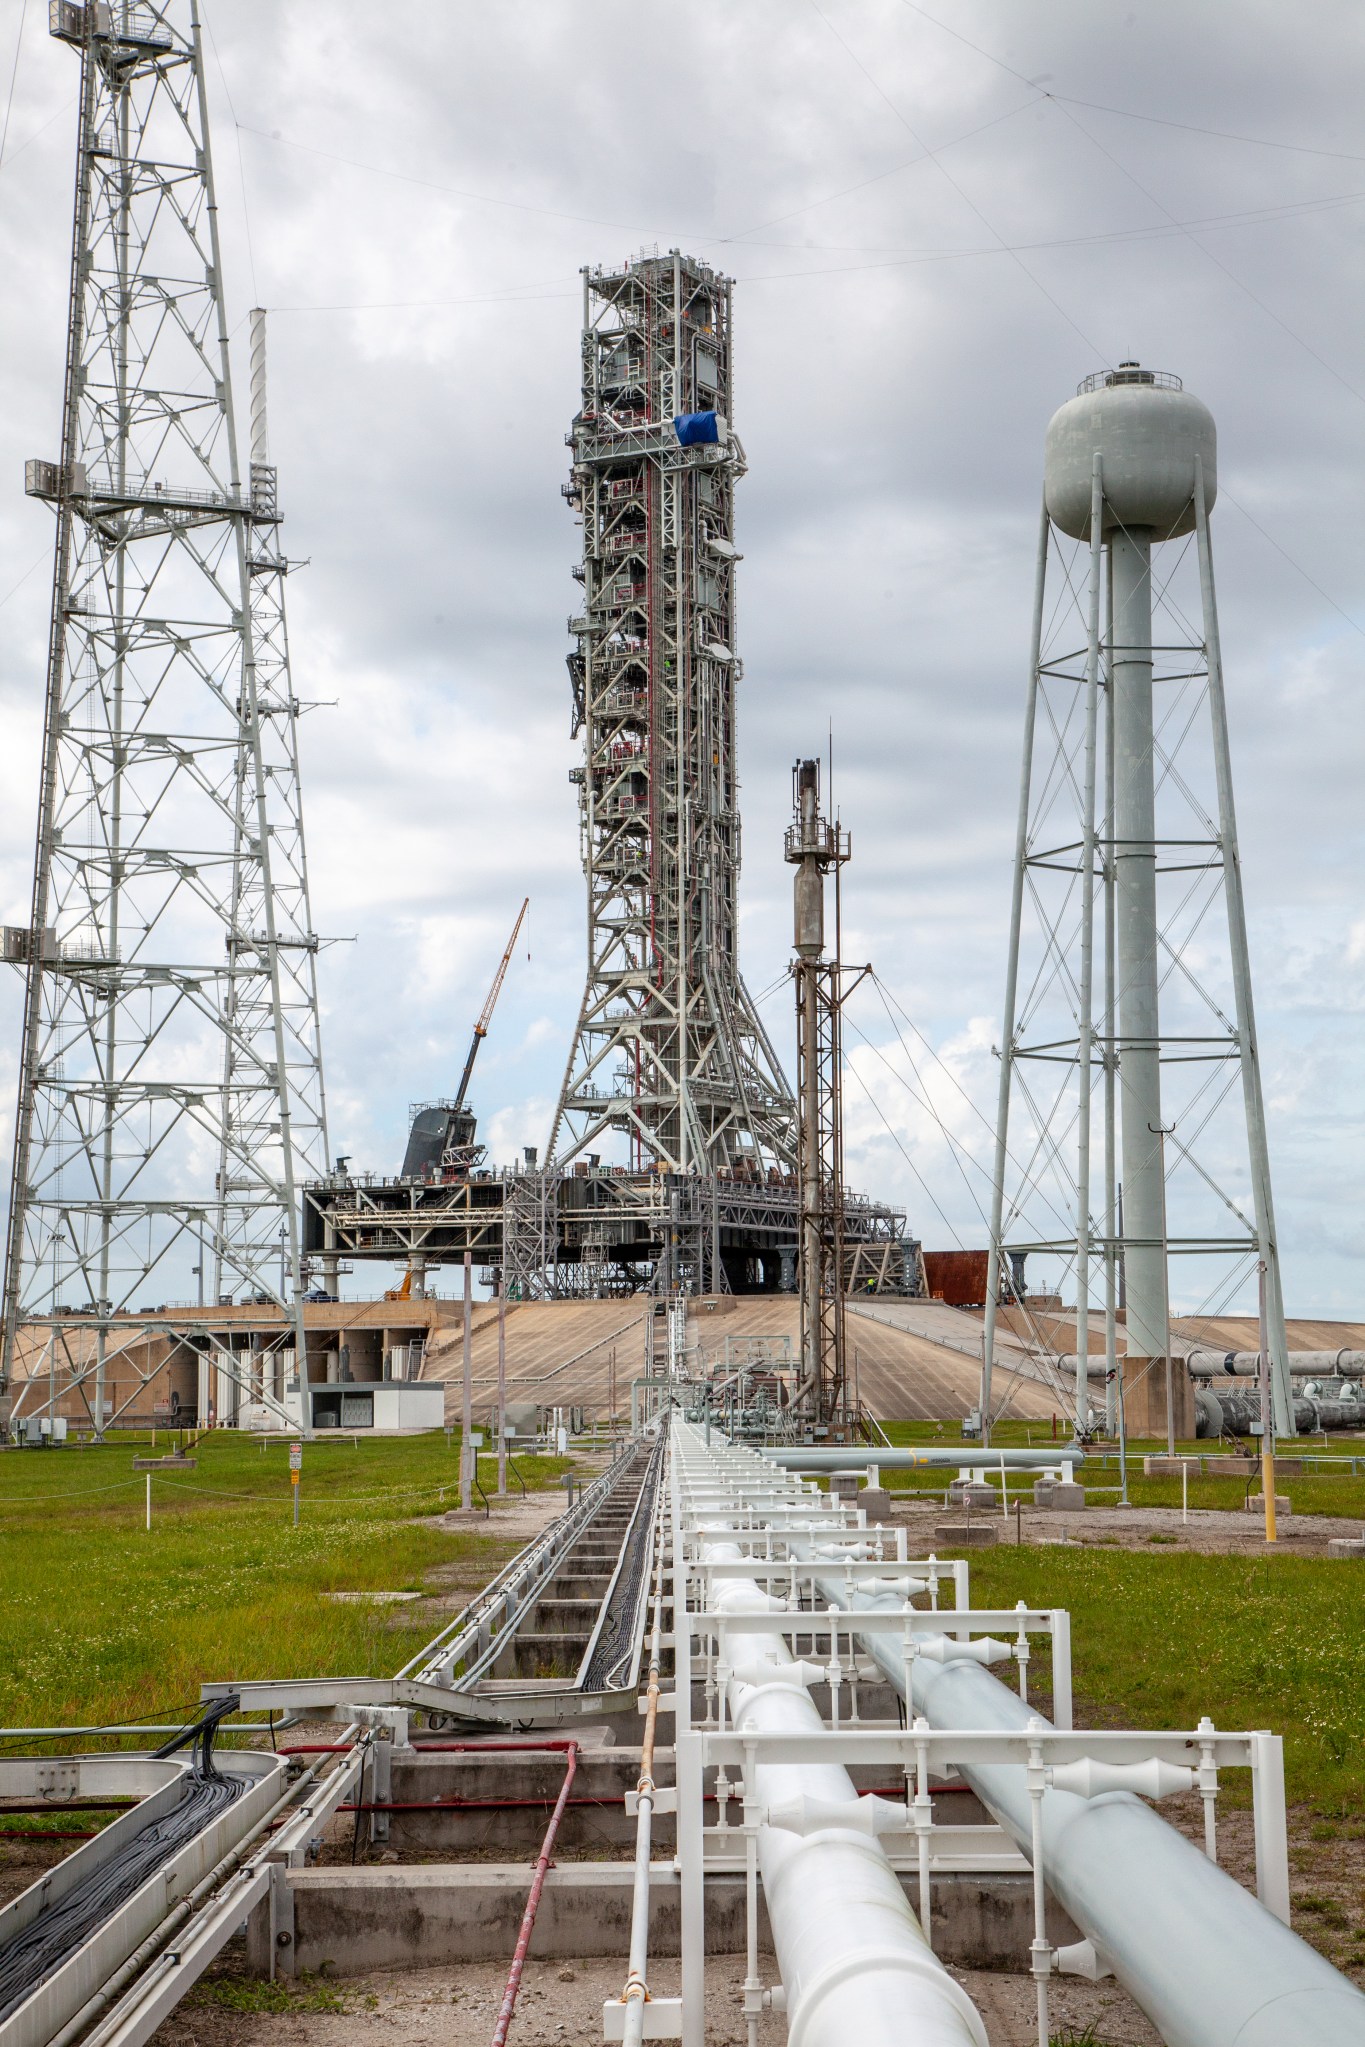 The cross-country line that liquid hydrogen will flow through can be seen stretching from the storage area to Launch Pad 39B. 